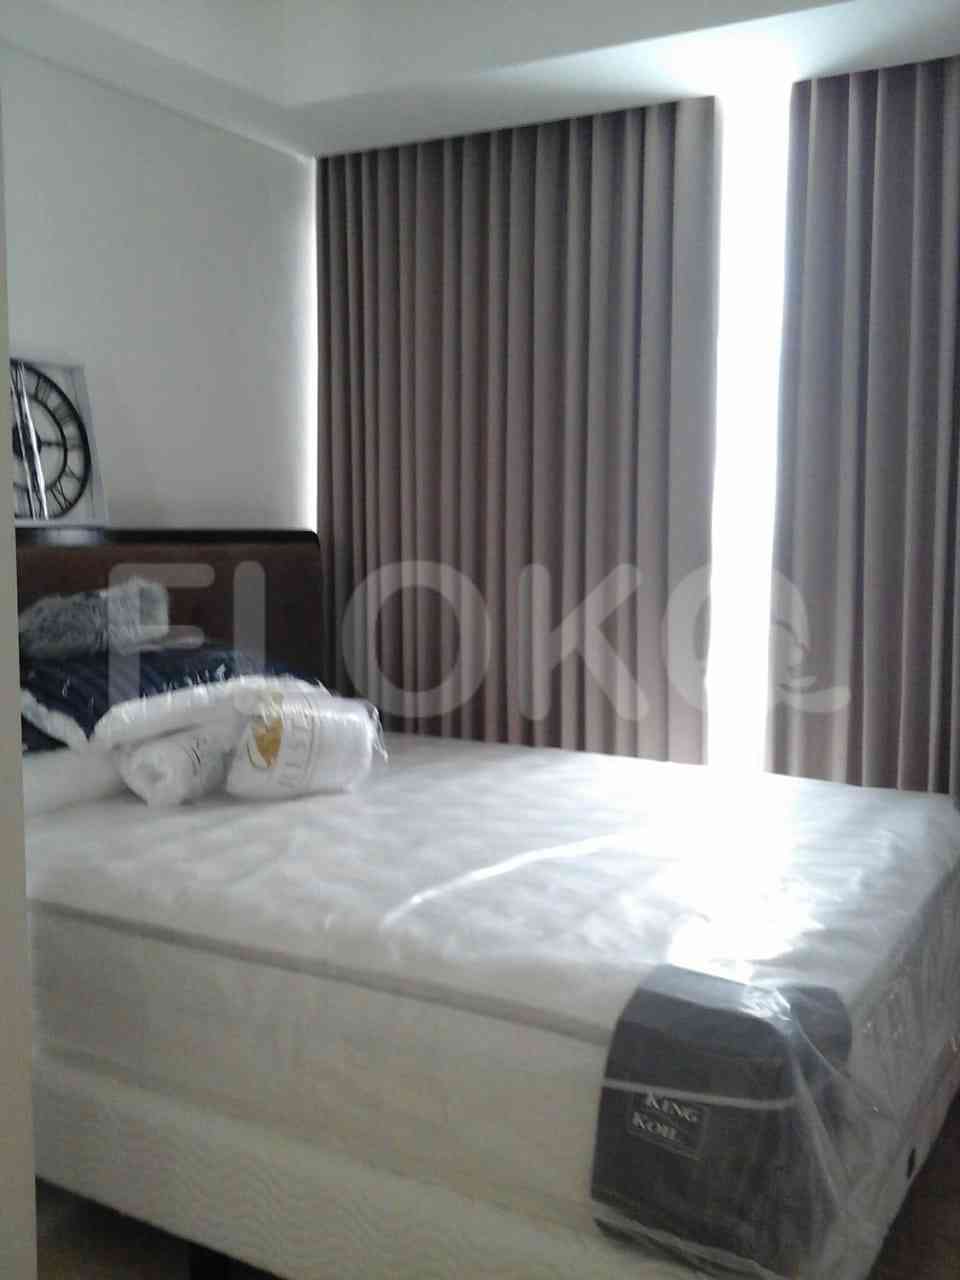 3 Bedroom on 9th Floor for Rent in Gold Coast Apartment - fka0a3 6